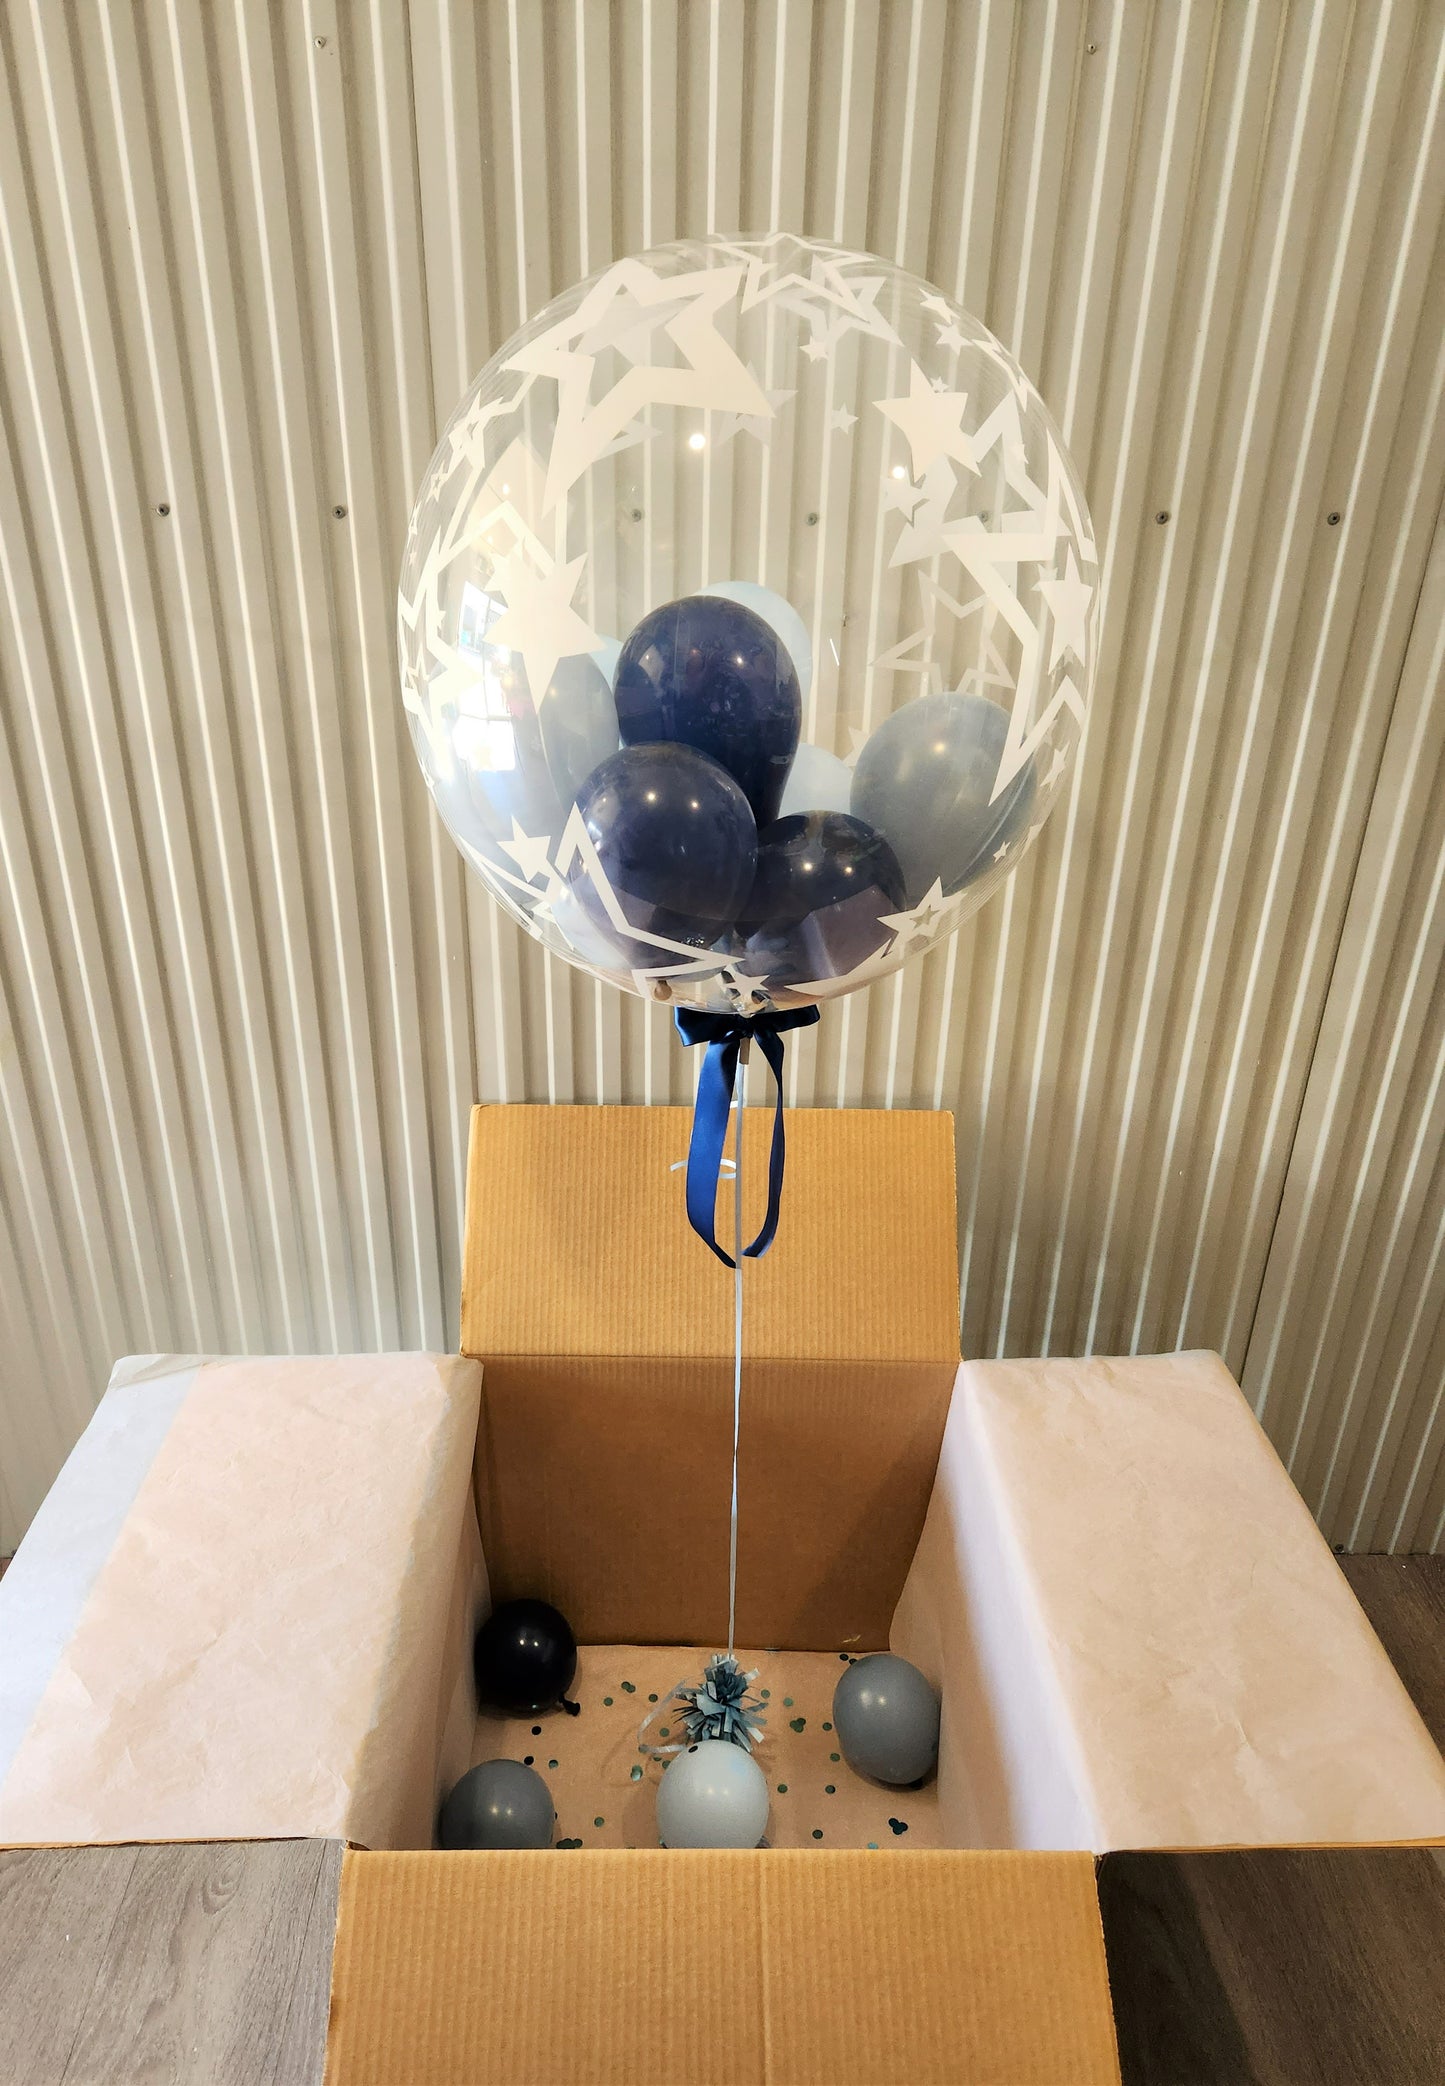 Balloon in a Box Gift - Father's Day